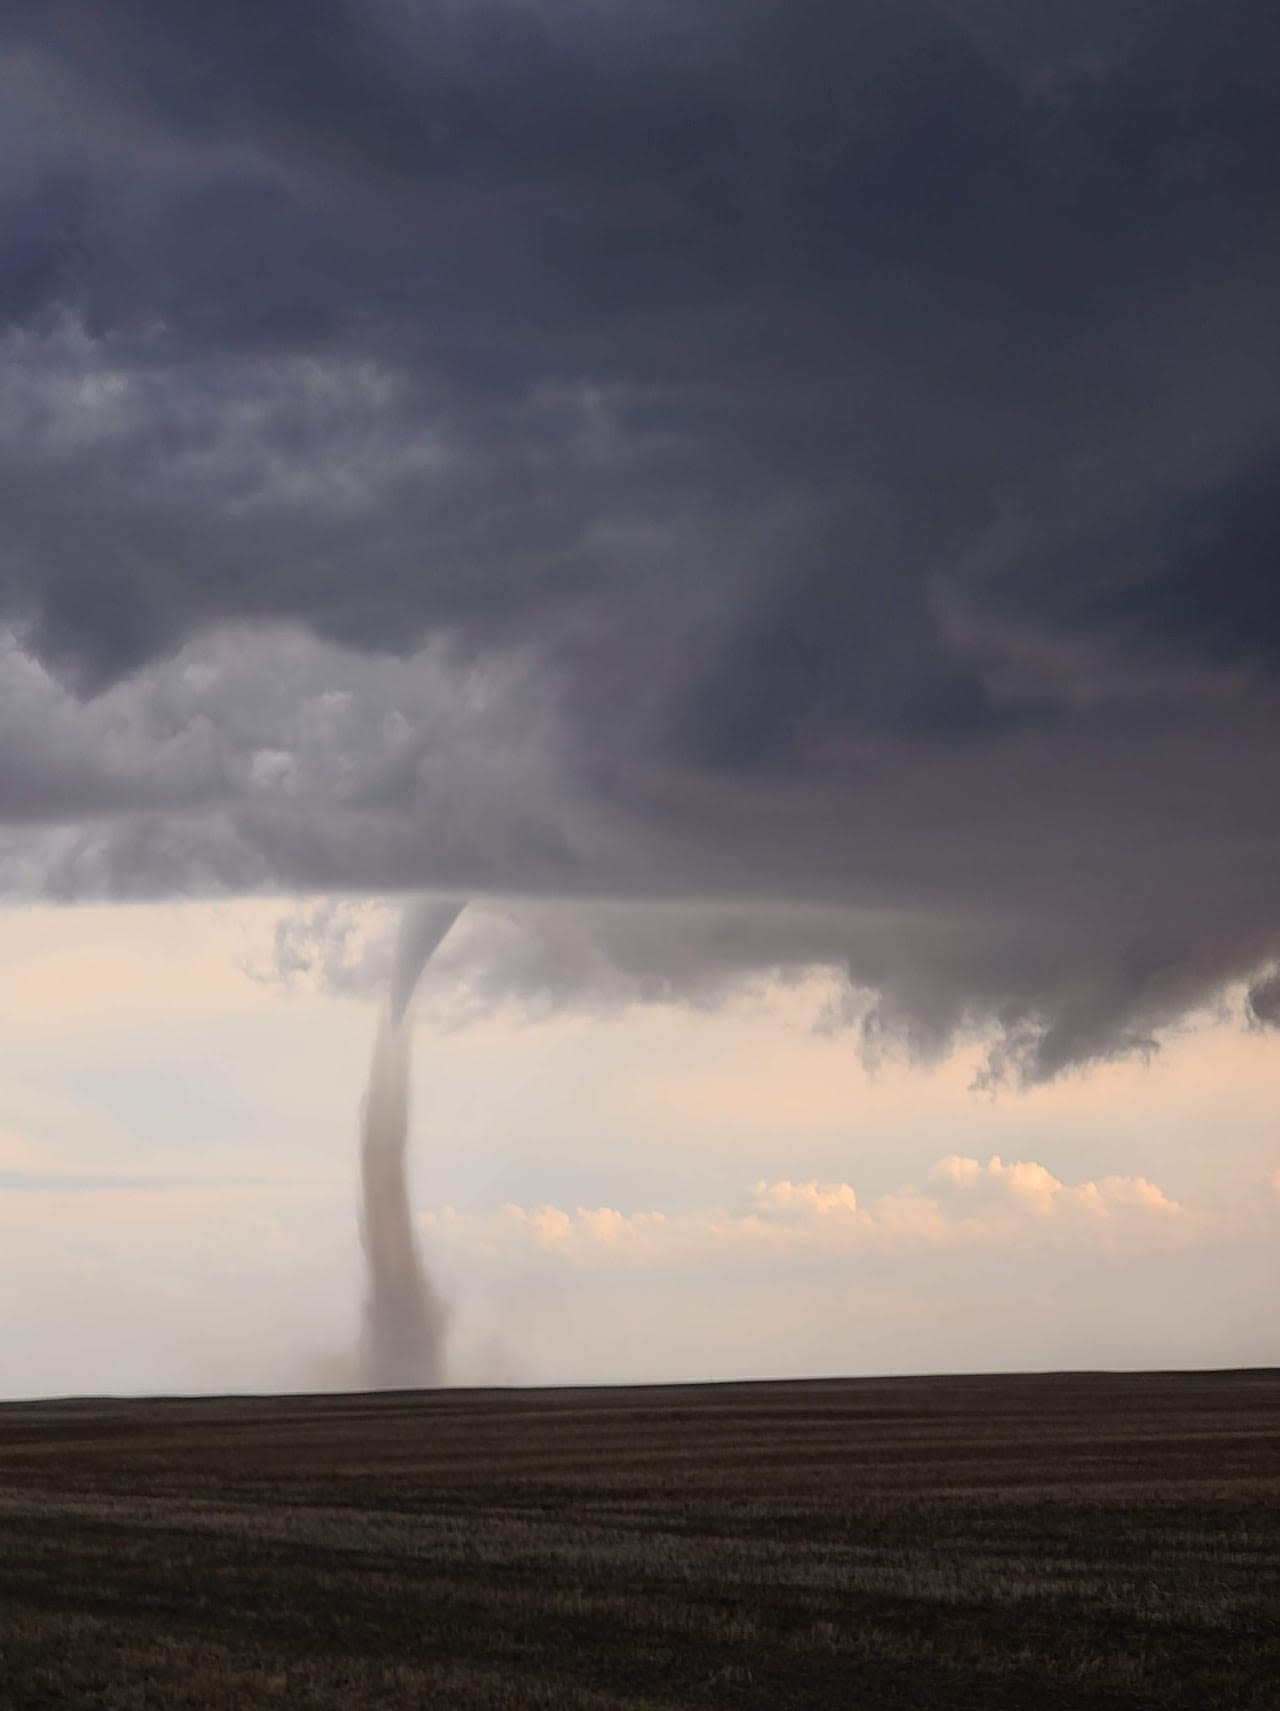 Tornado researchers say a twister touched down near Leamington, Ont., on Tuesday